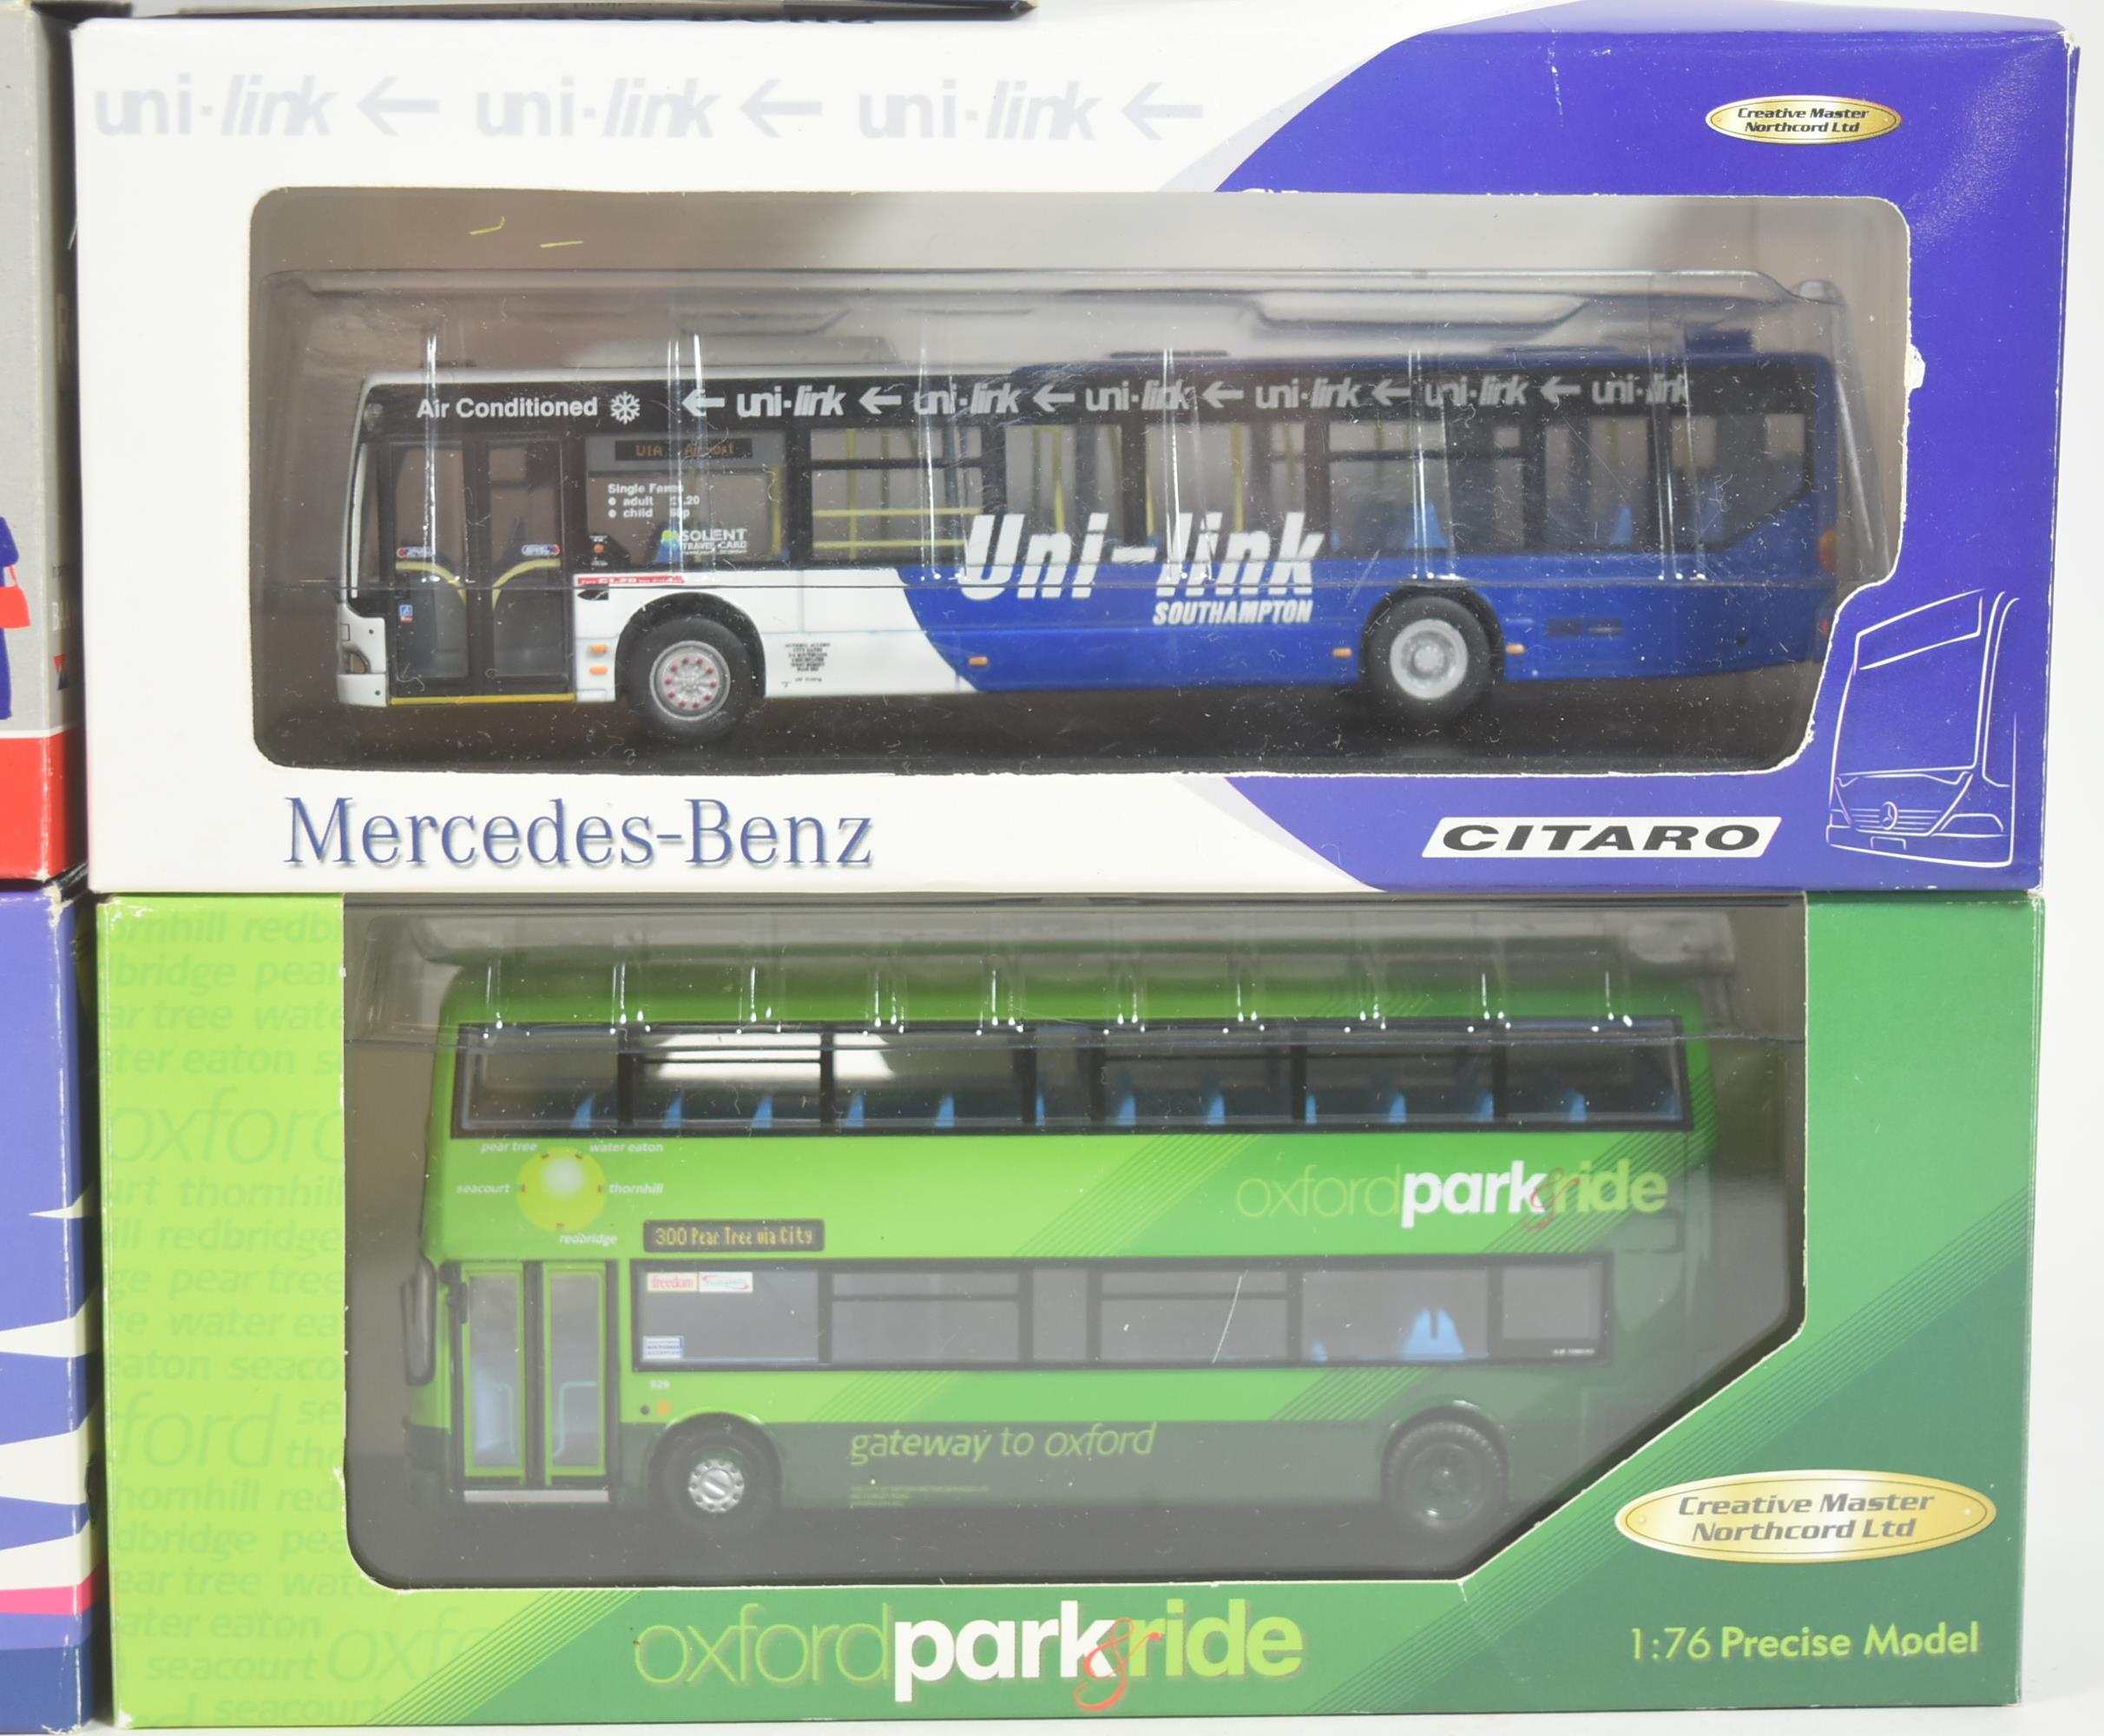 DIECAST - X5 CREATIVE MASTER NORTHCORD DIECAST MODEL BUSES - Image 3 of 4